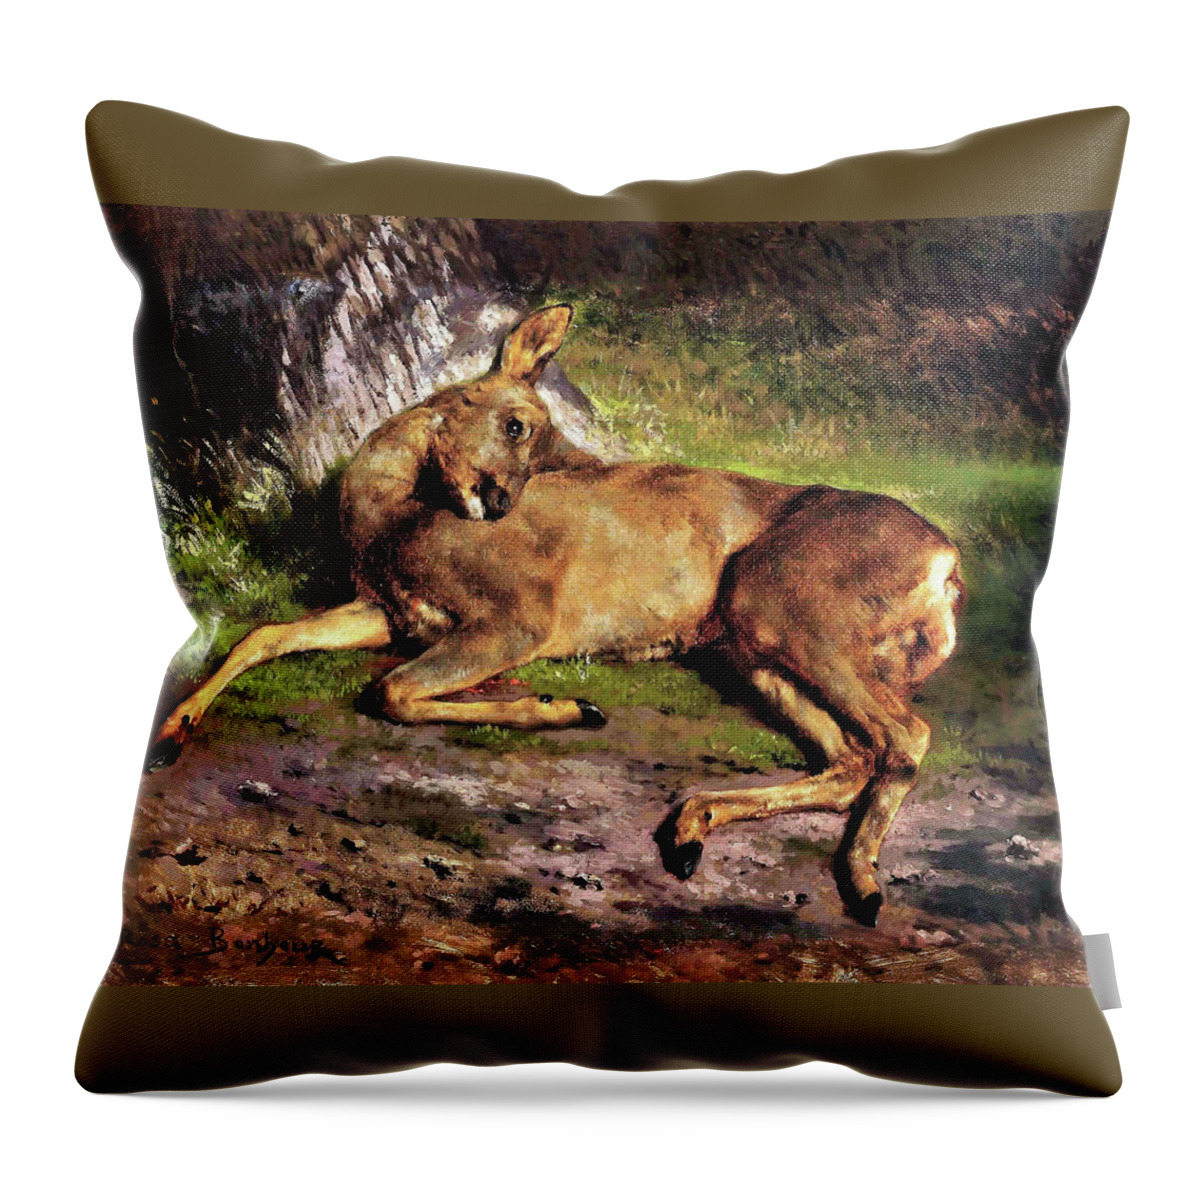 A Roe Deer In The Forest Throw Pillow featuring the painting A roe deer in the forest - Digital Remastered Edition by Rosa Bonheur